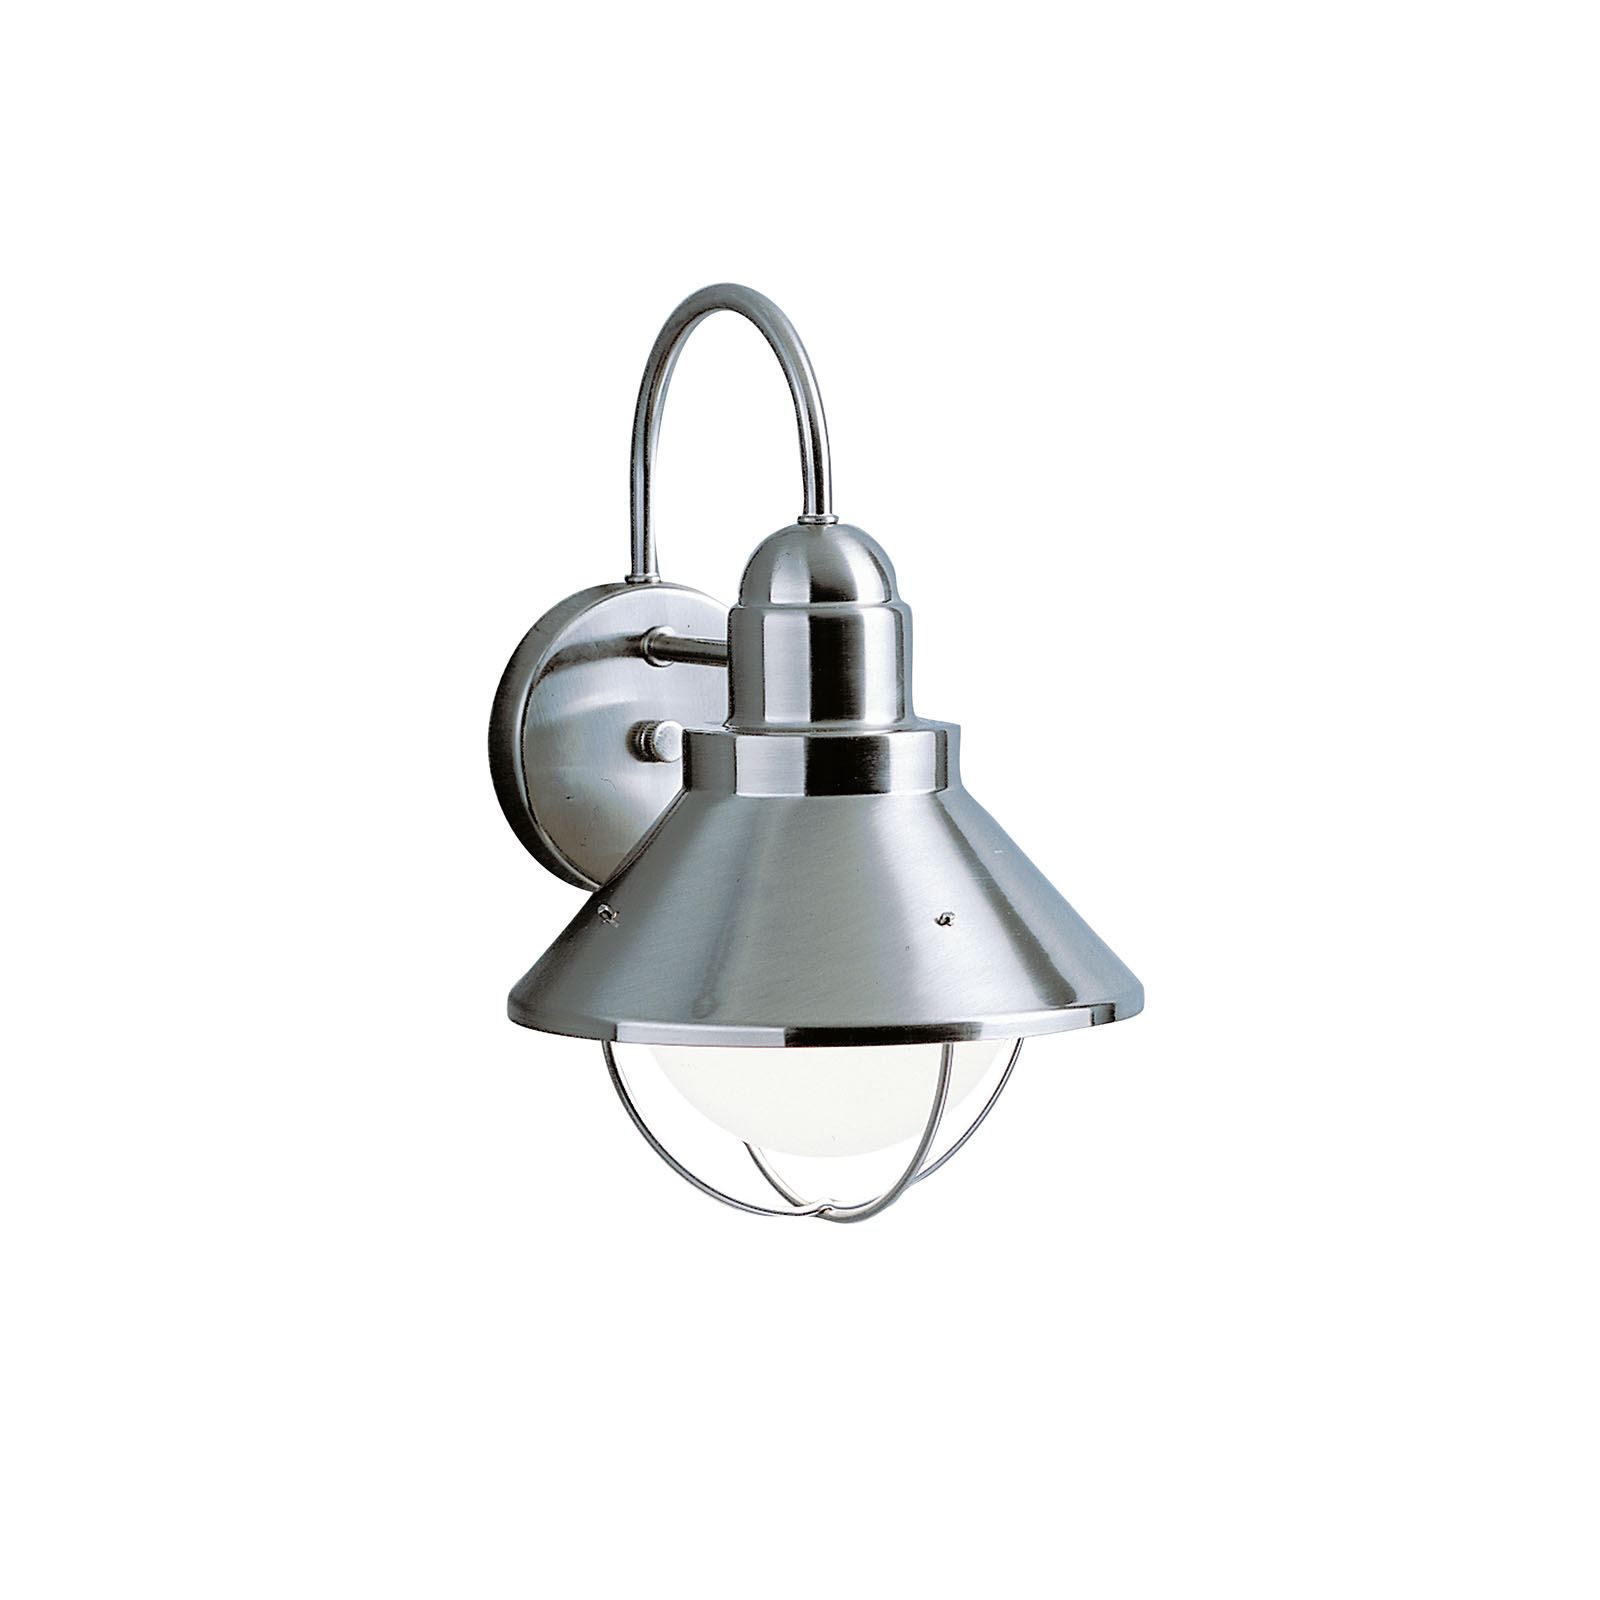 The Seaside(TM) 14.25in. 1 light outdoor wall light features a classic look with its Brushed Nickel and glass globe. The Seaside(TM)wall light works in several aesthetic environments, including rustic, coastal, traditional and transitional.